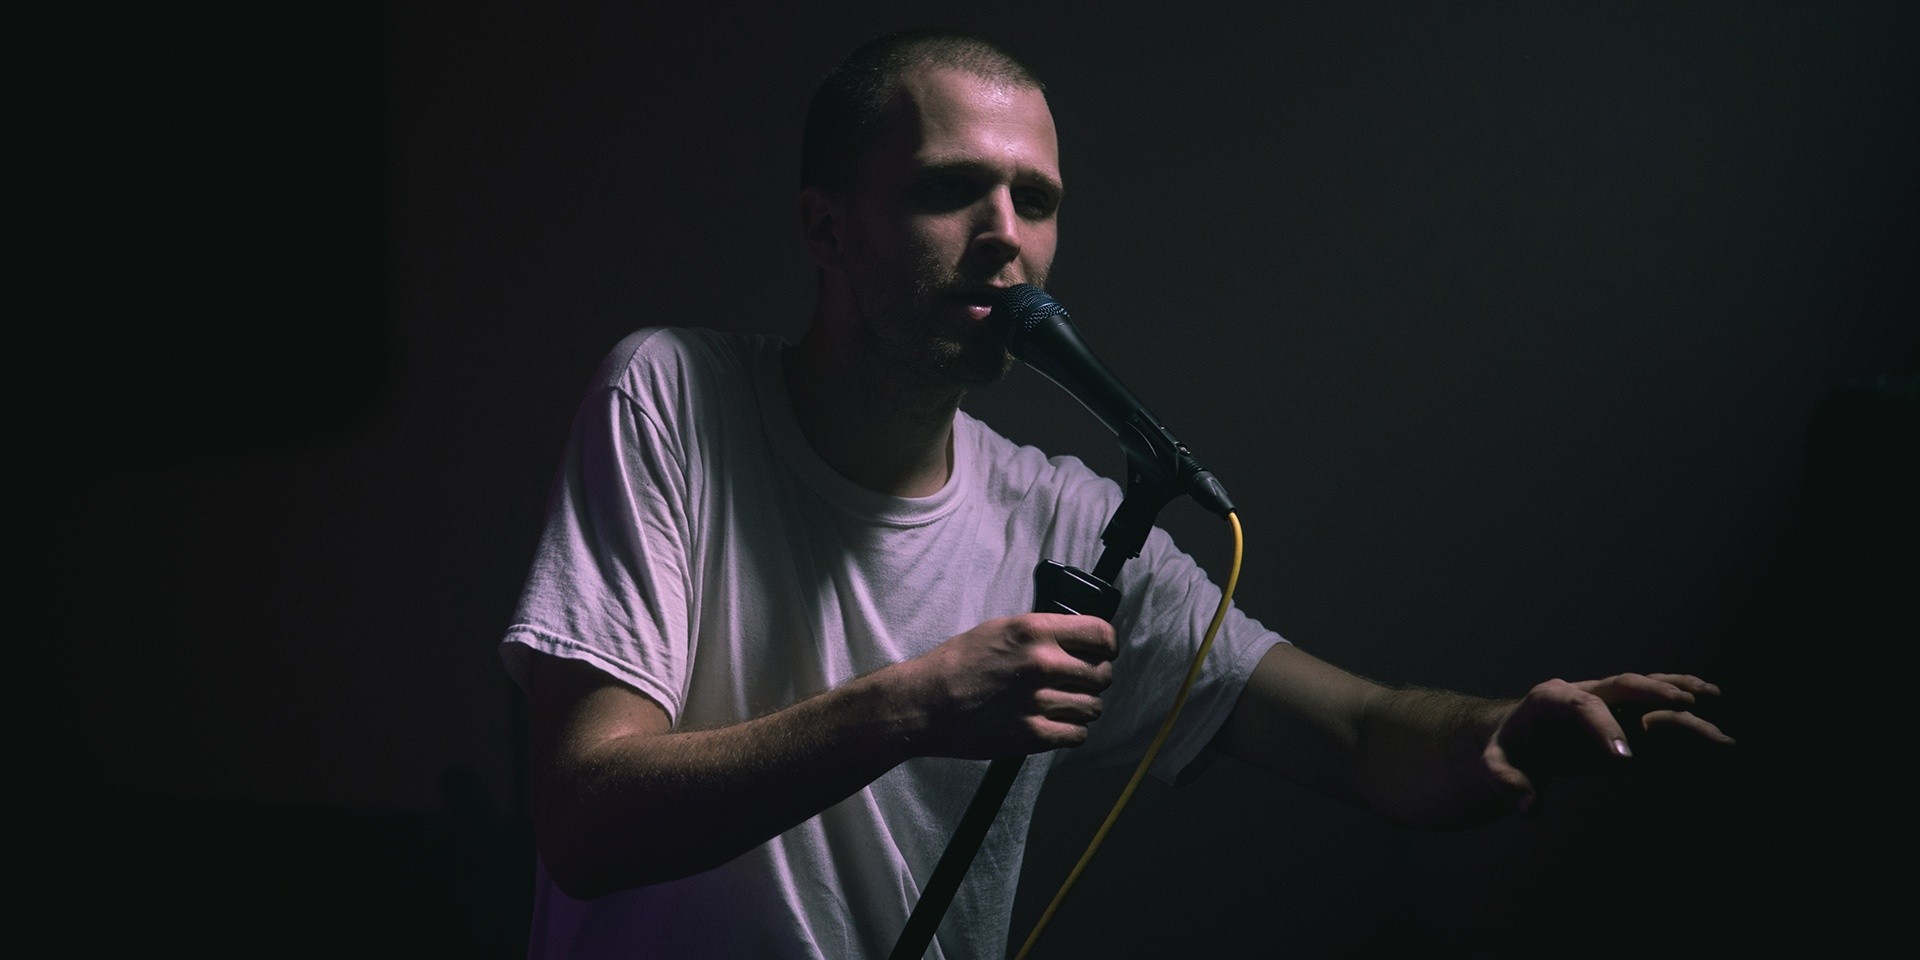 JMSN oozes charisma on his first Singapore show — photo gallery